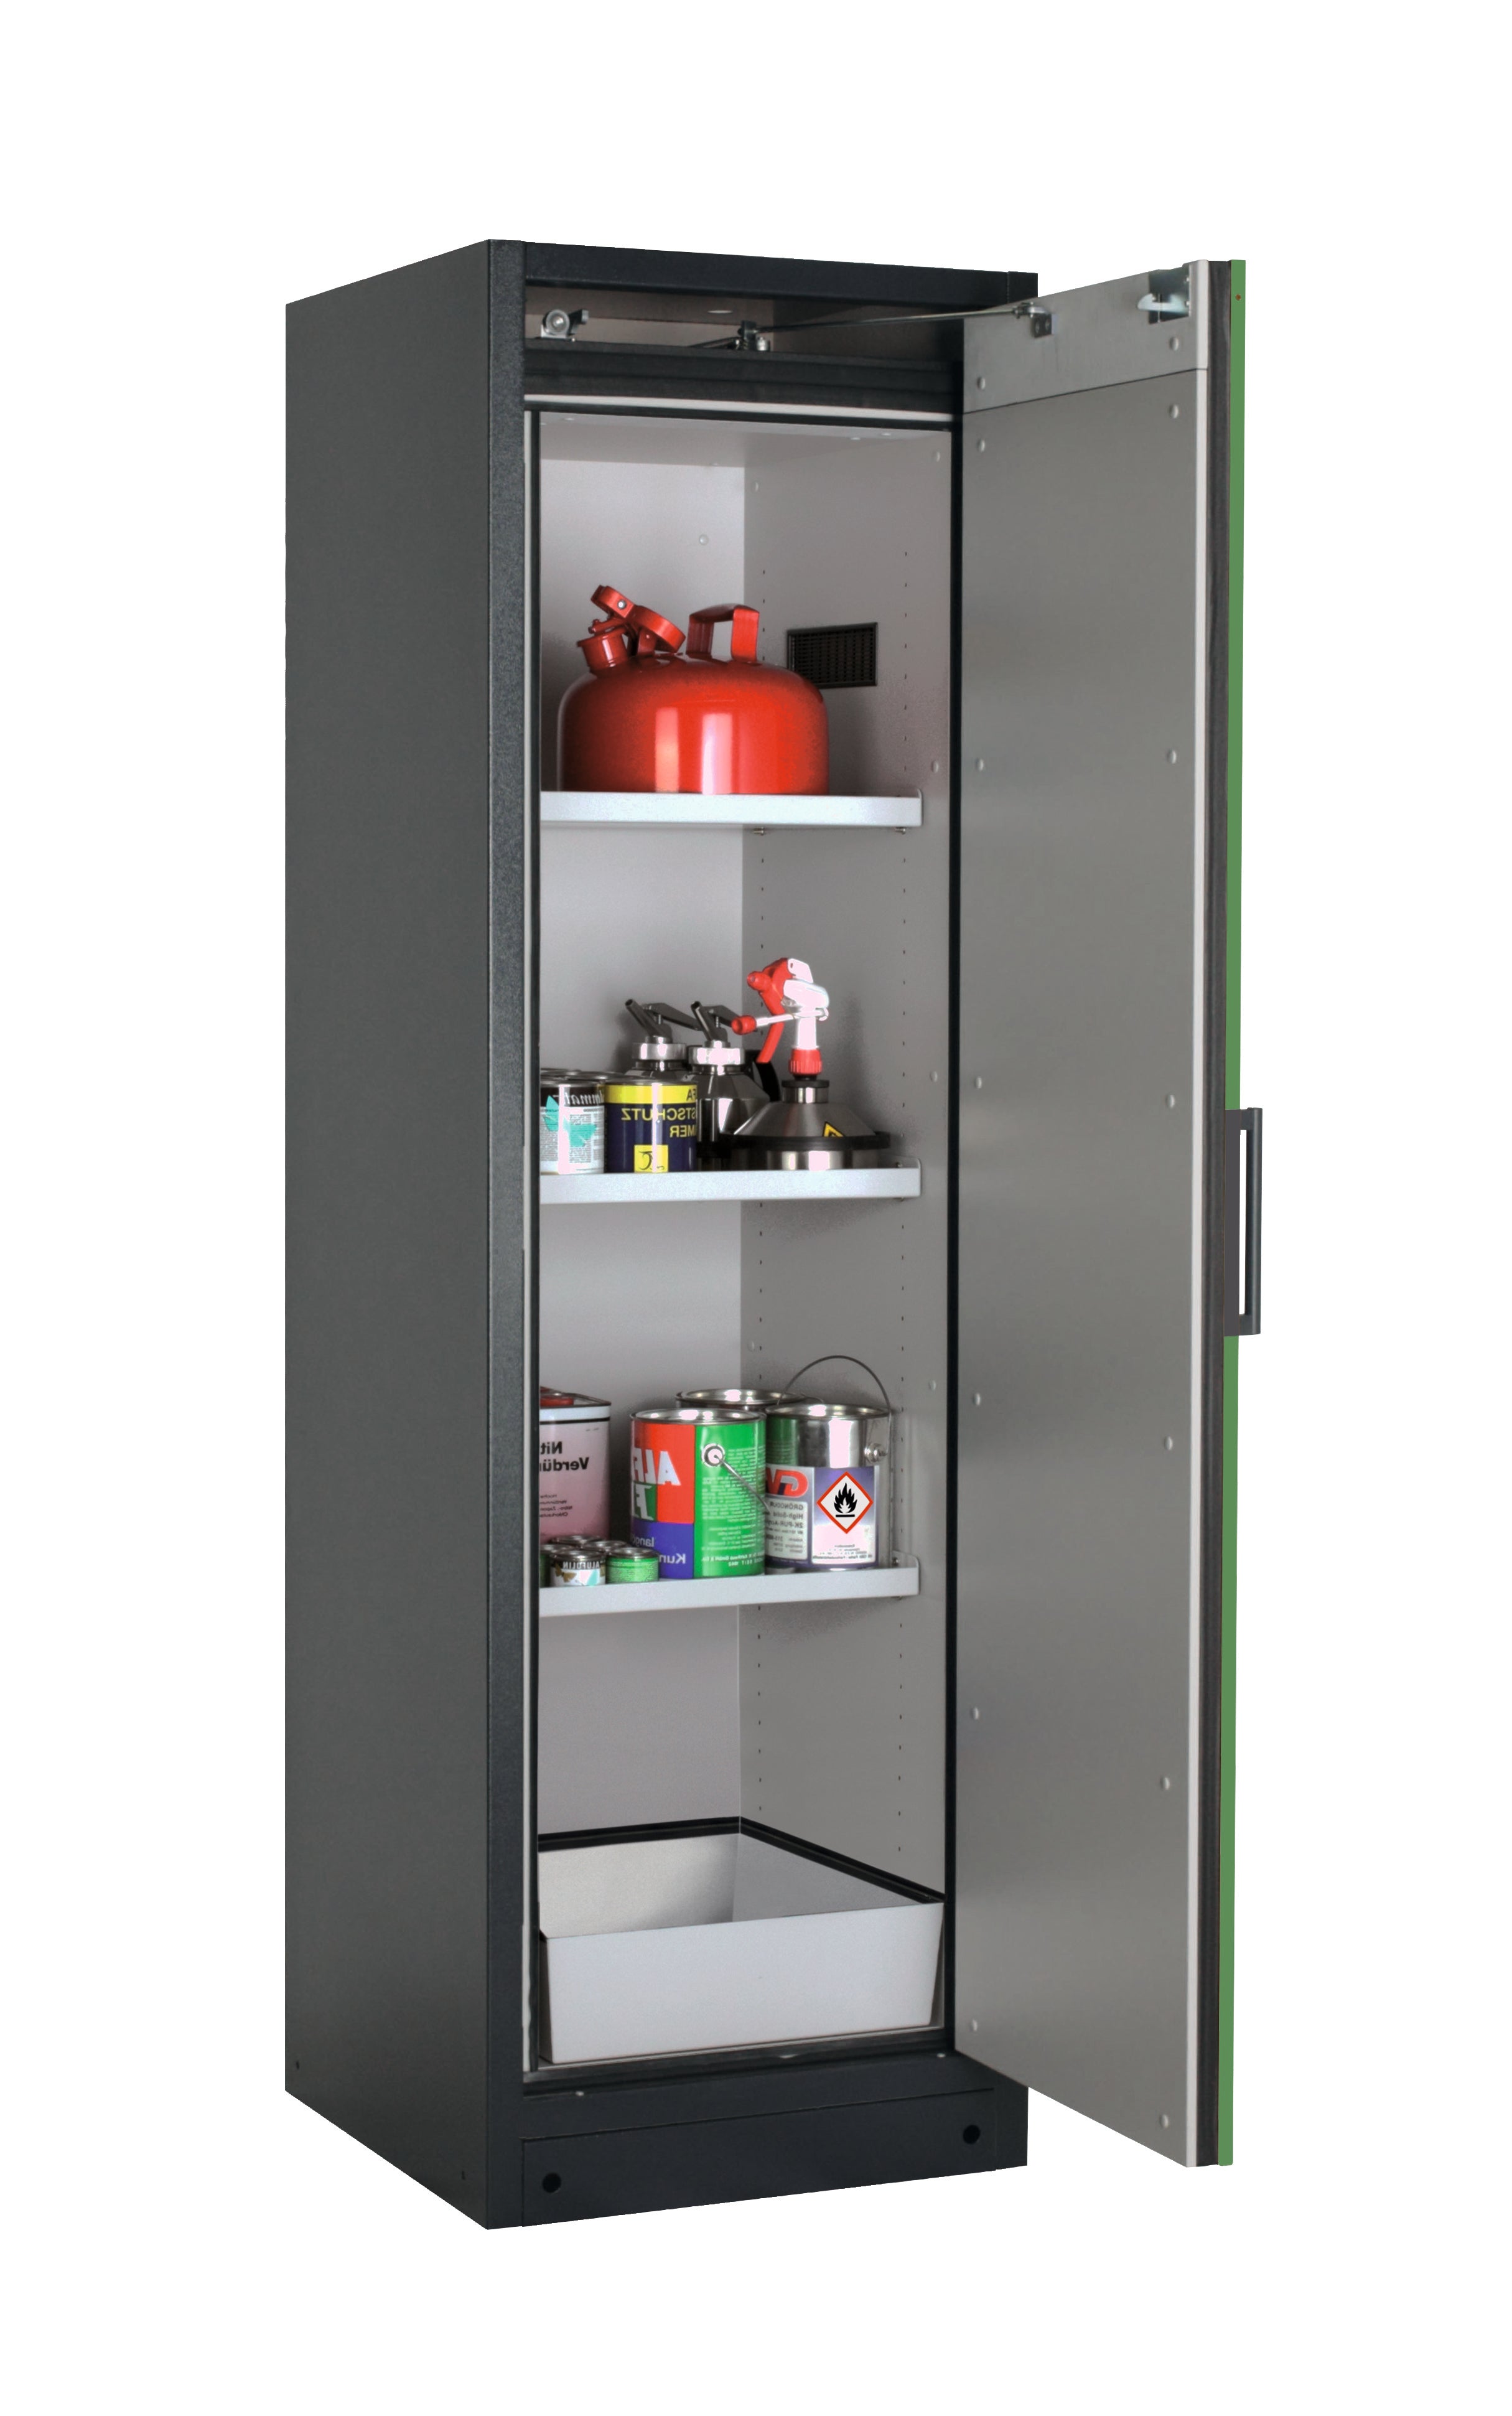 Type 90 safety storage cabinet Q-CLASSIC-90 model Q90.195.060.R in reseda green RAL 6011 with 3x shelf standard (sheet steel),